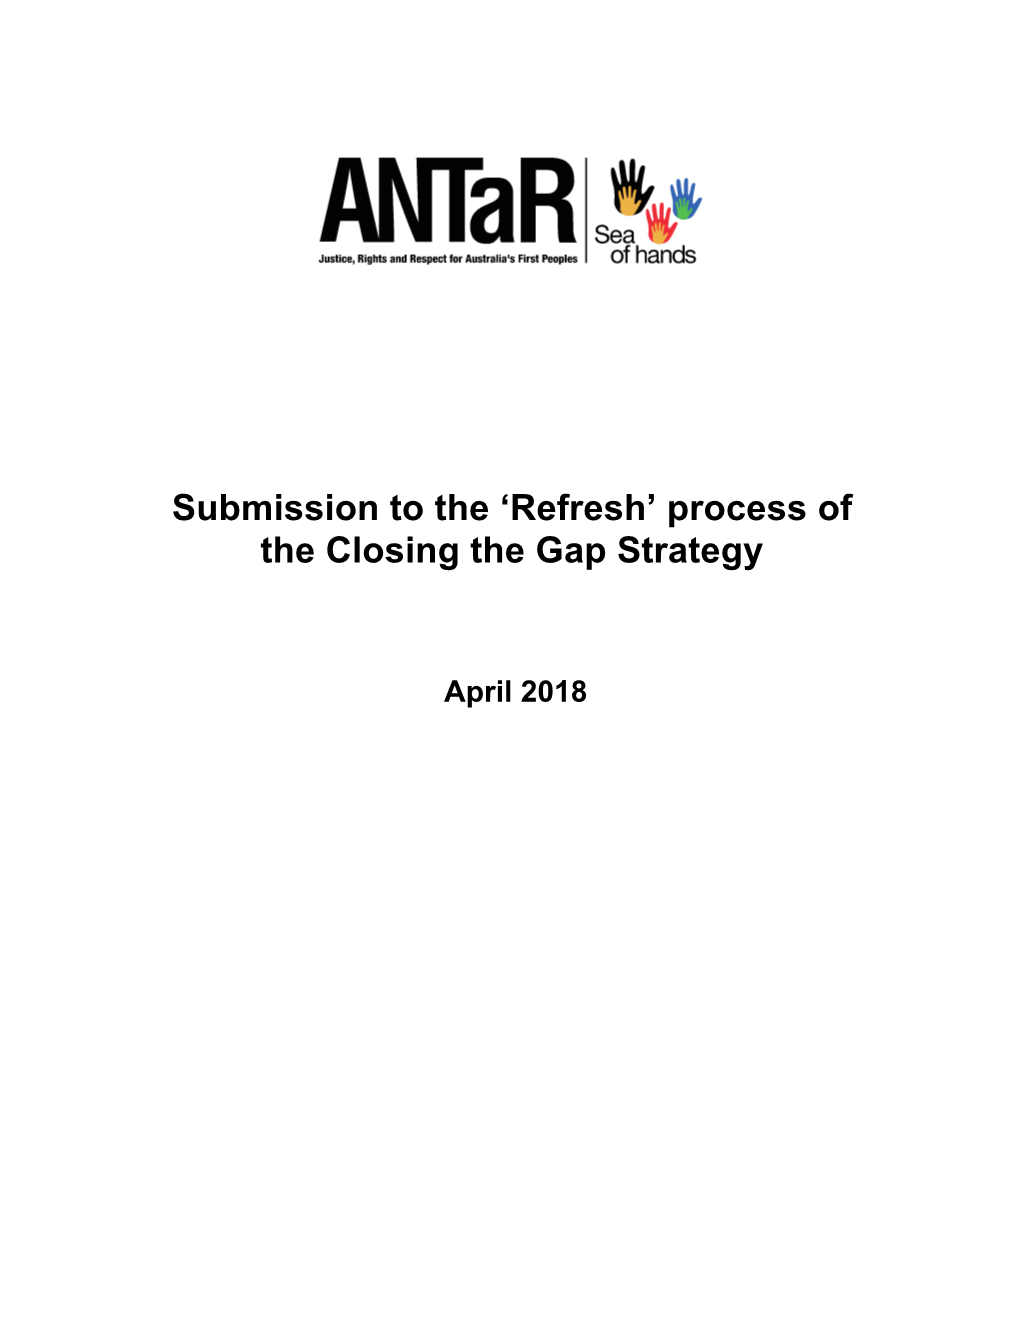 Submission to the 'Refresh' Process of the Closing the Gap Strategy